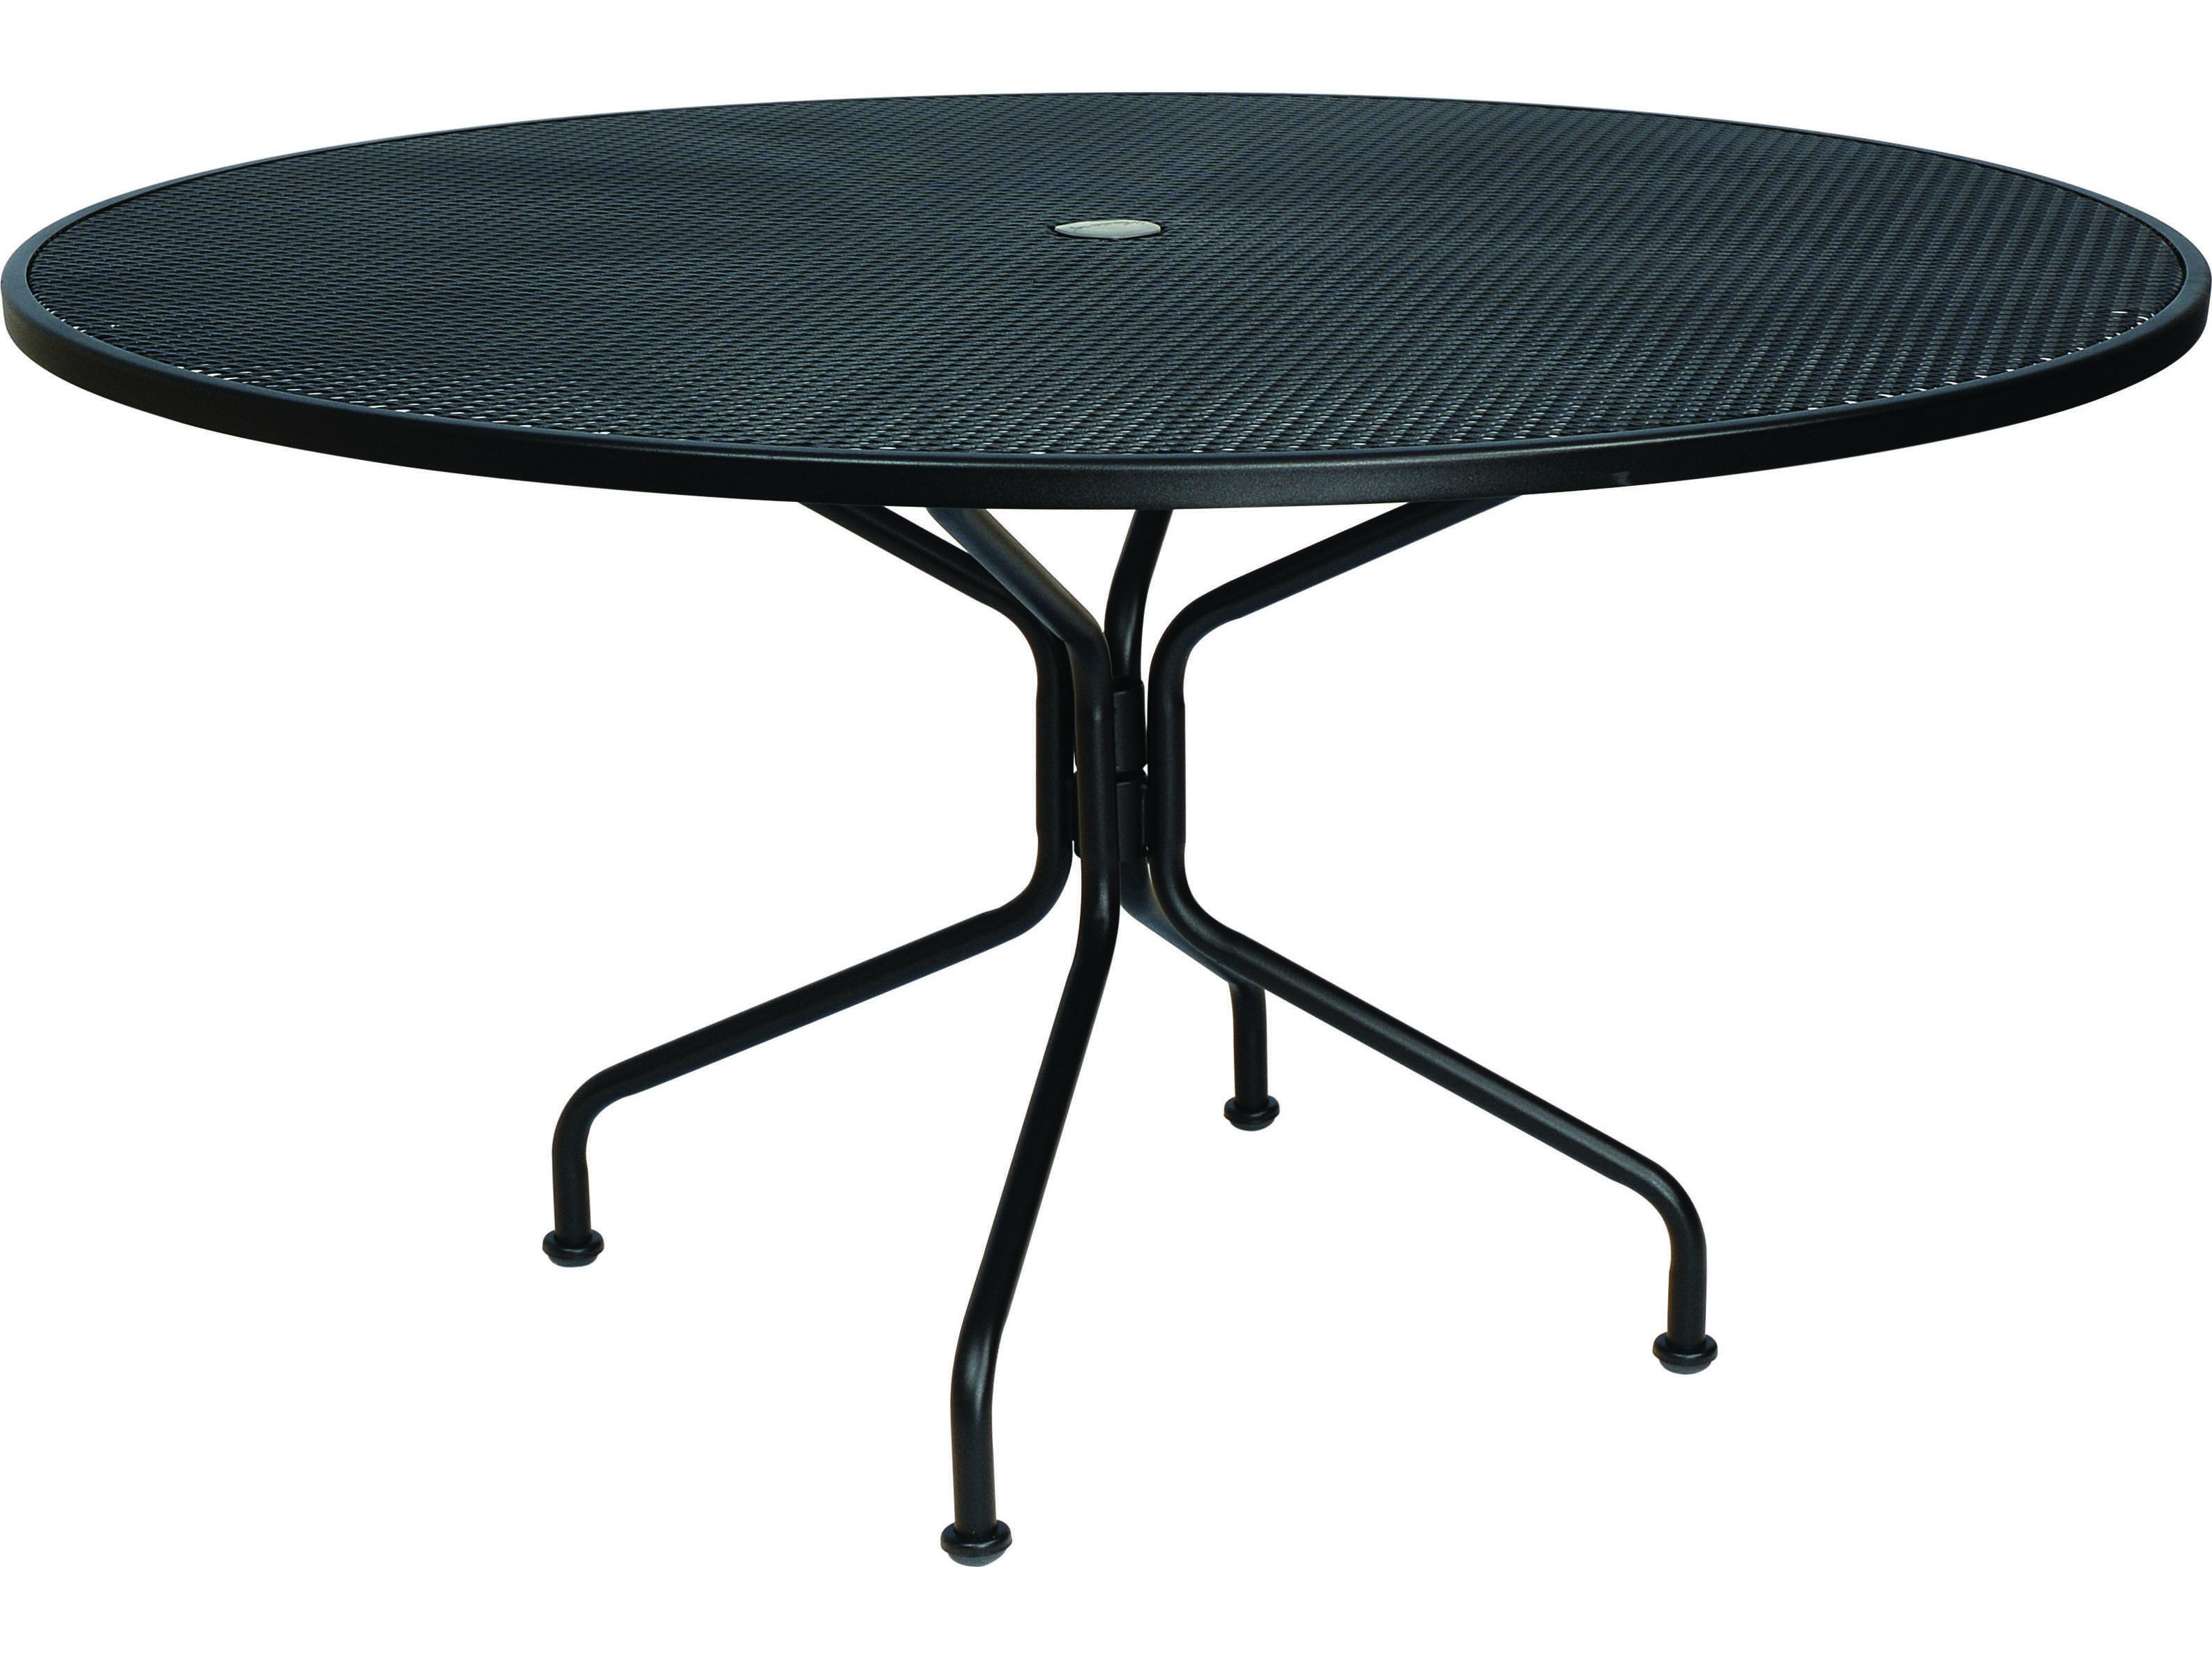 Woodard Wrought Iron Mesh 54 Wide, Round Patio Table With Umbrella Hole And Chairs